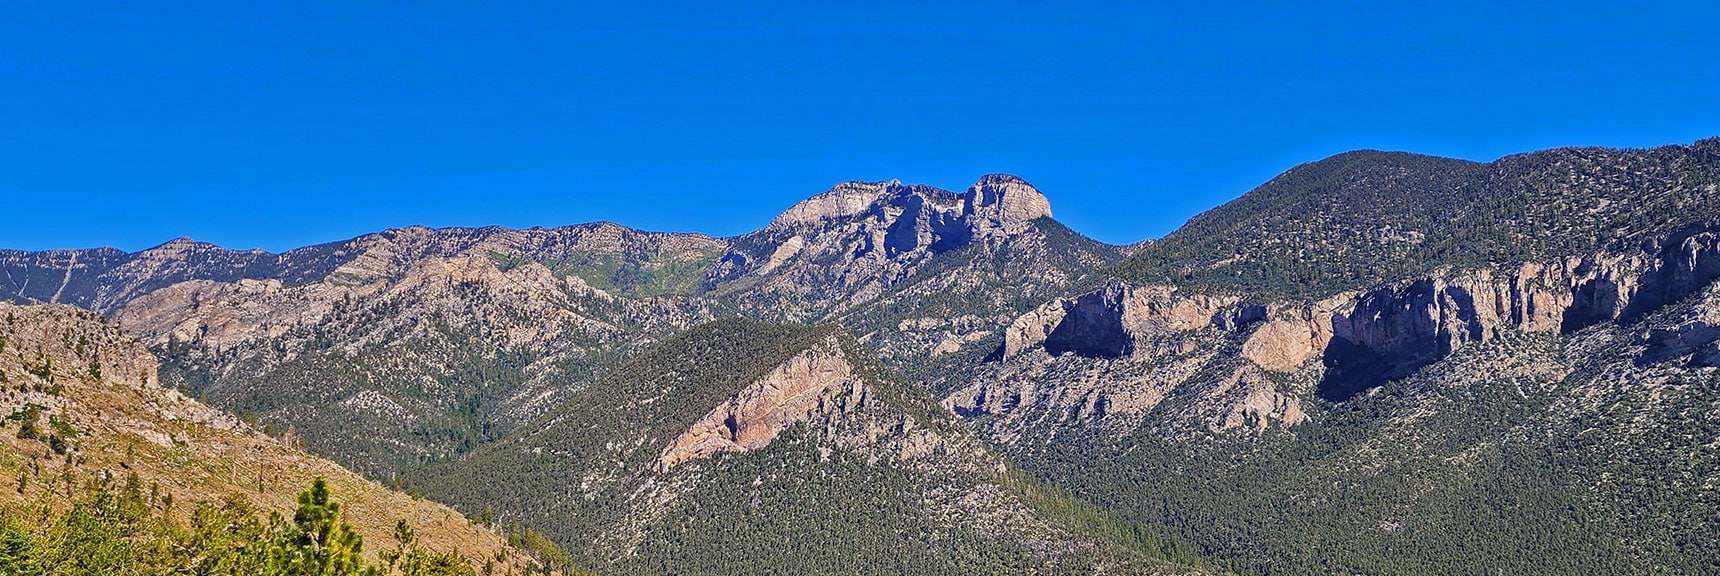 Fletcher Peak and Cockscomb Ridge Viewed from Harris Mt. Across Kyle Canyon | Fletcher Canyon / Fletcher Peak / Cockscomb Ridge Circuit | Mt. Charleston Wilderness | Spring Mountains, Nevada